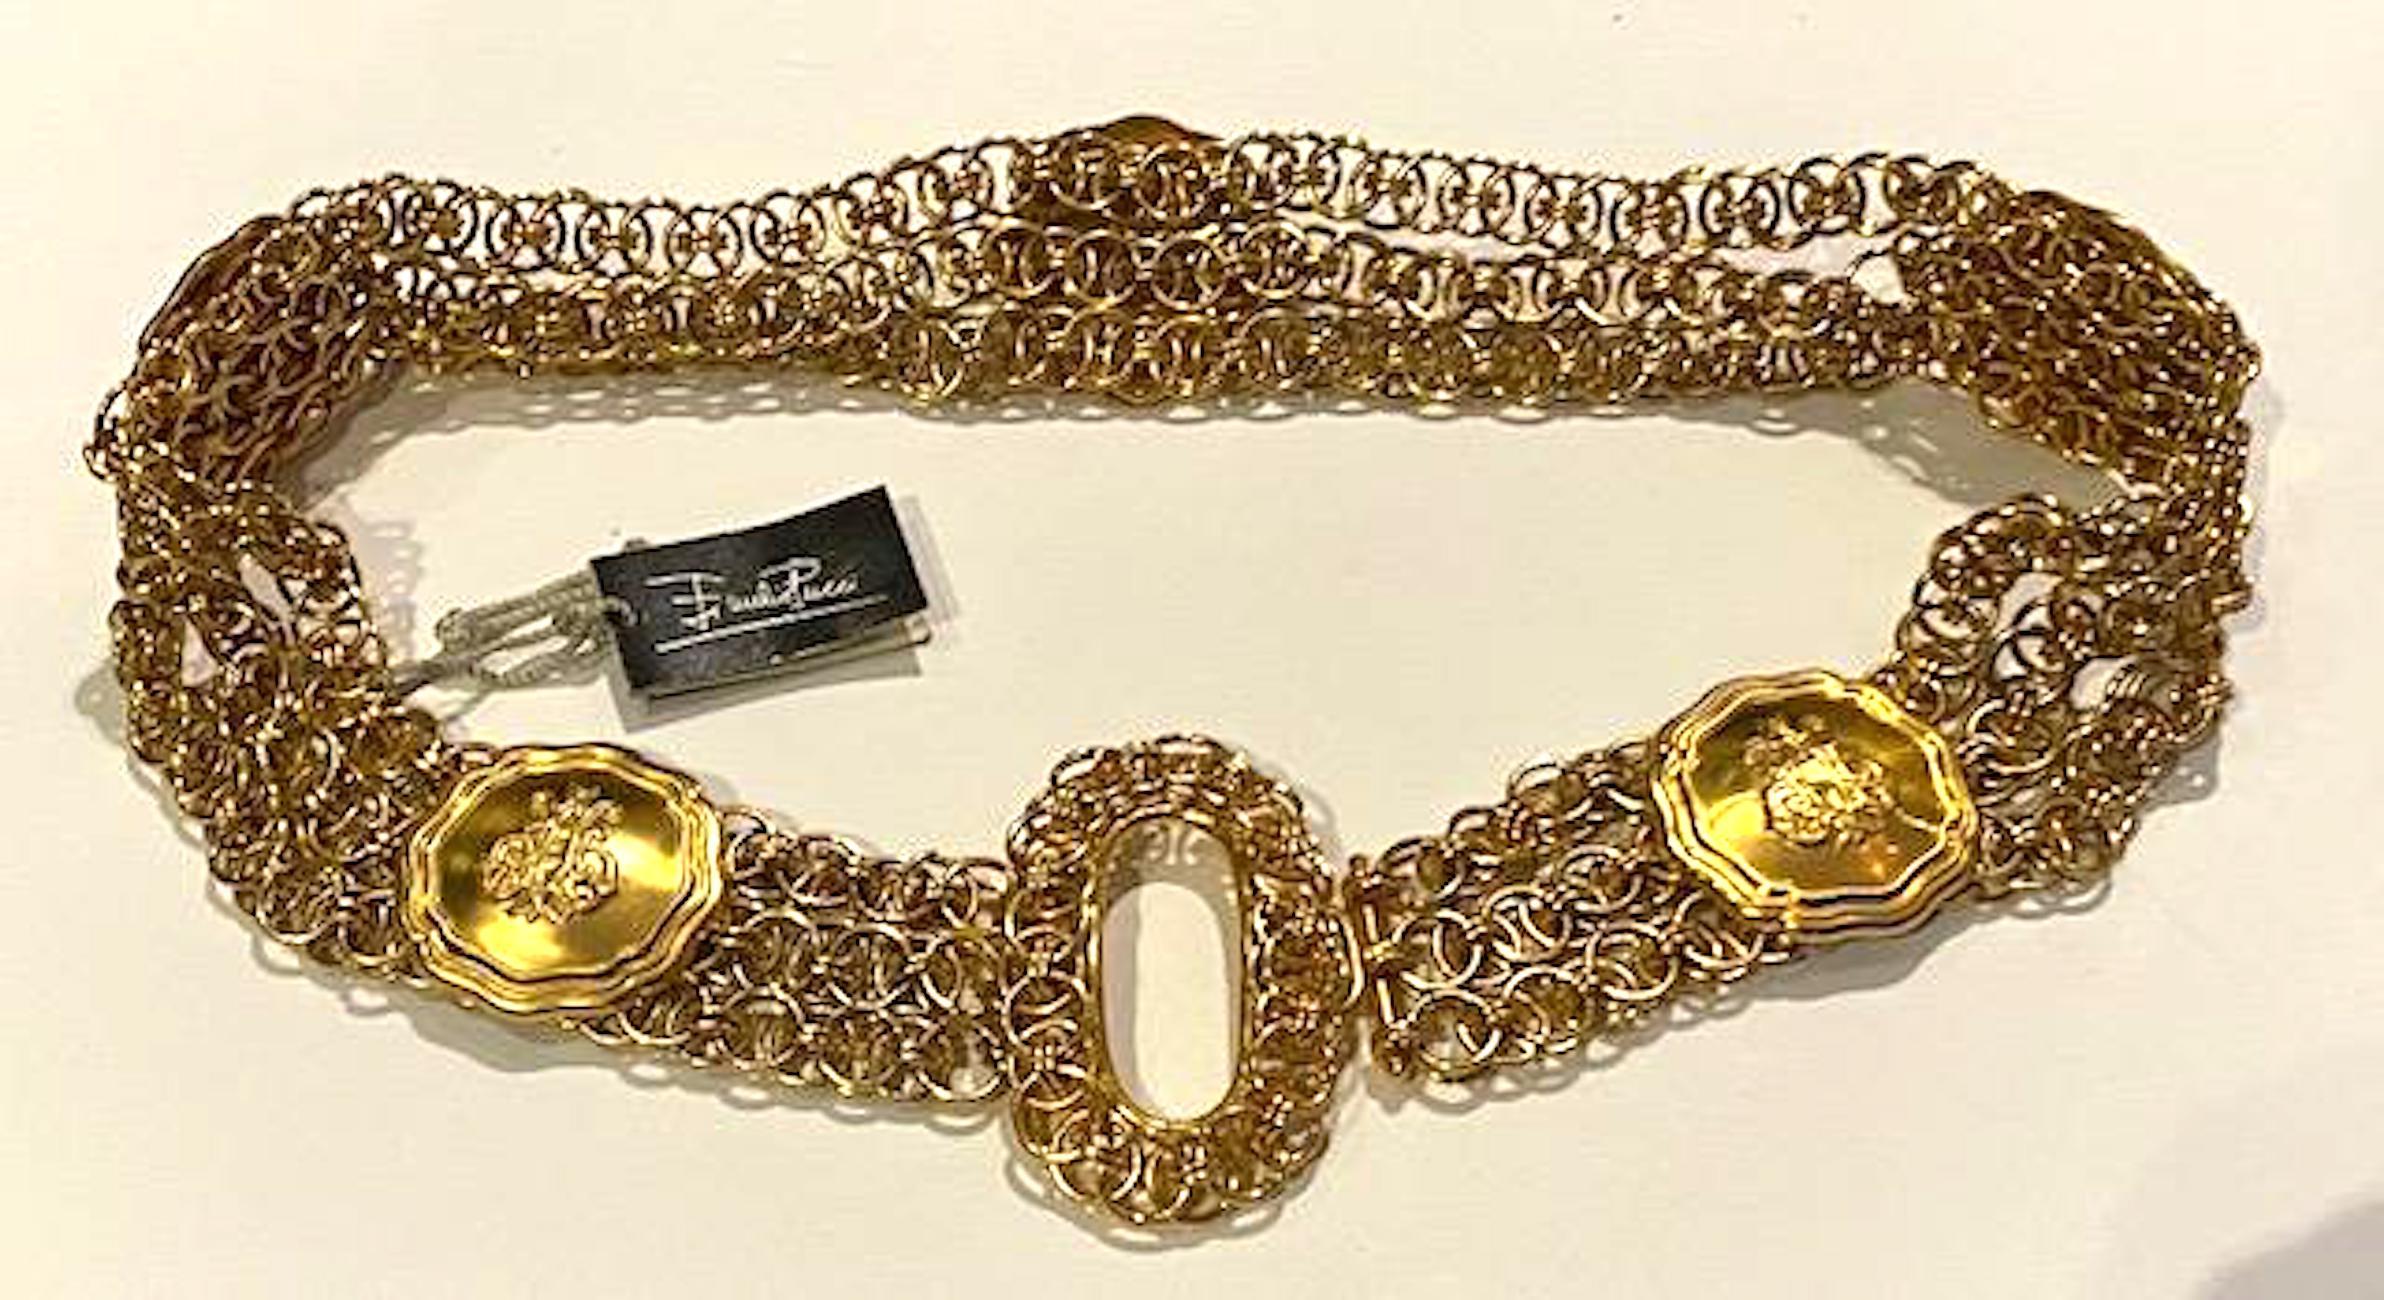 Brown Emilio Pucci 1980s Medallion and Chain Belt